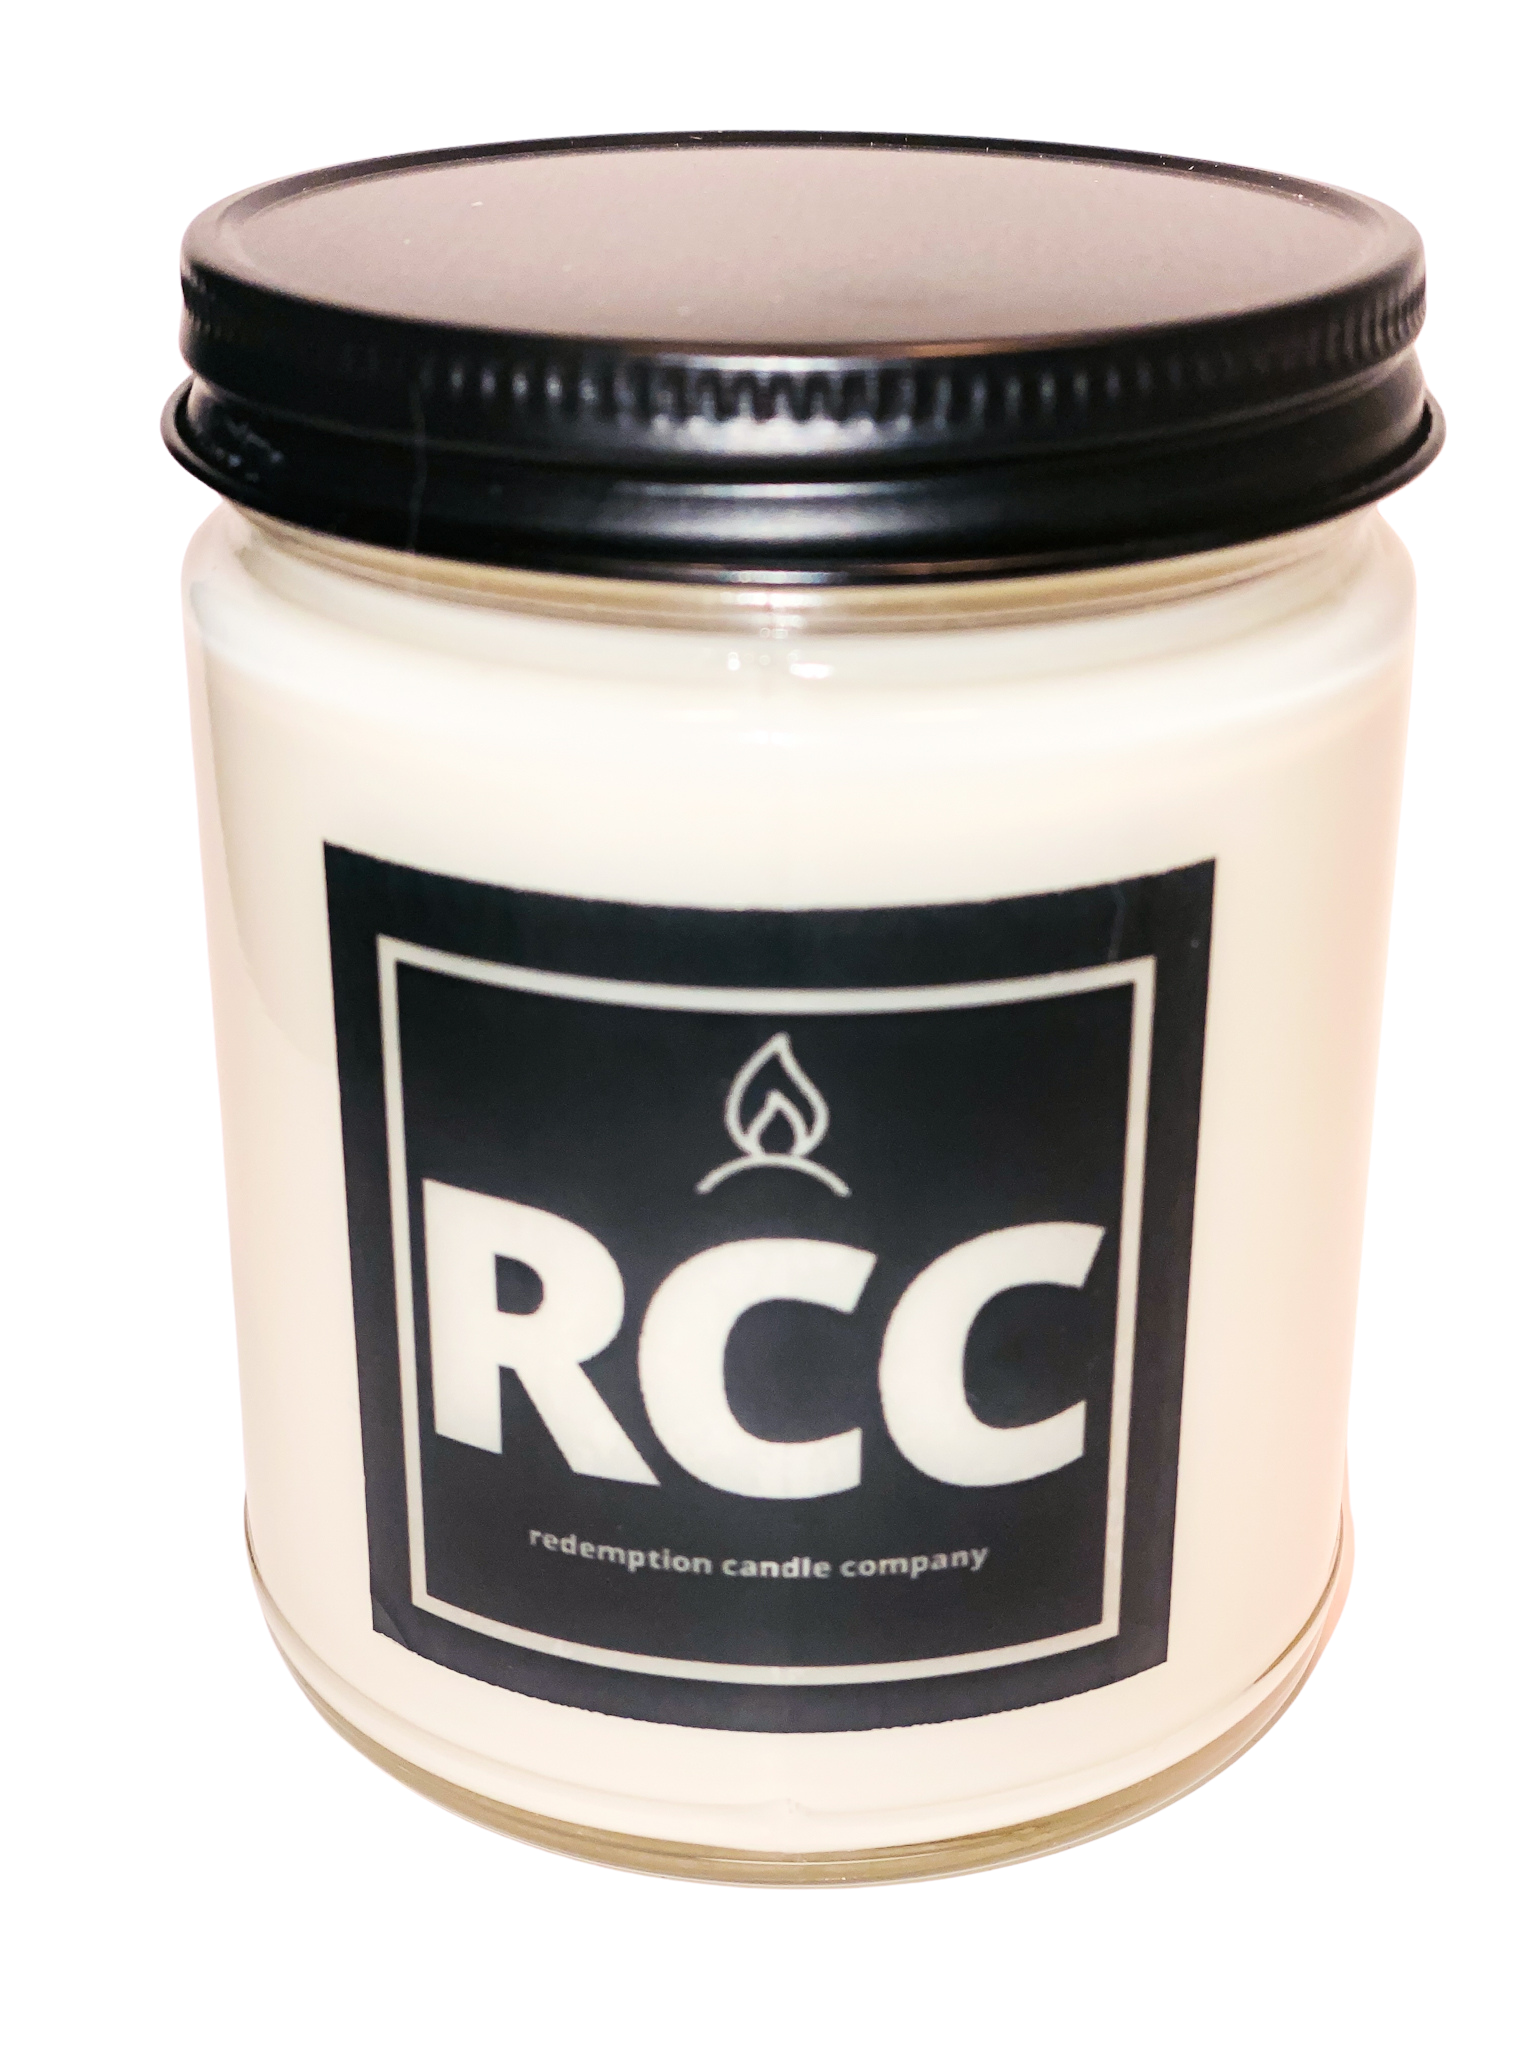 Fruit Circle Loops - Redemption Candle Company